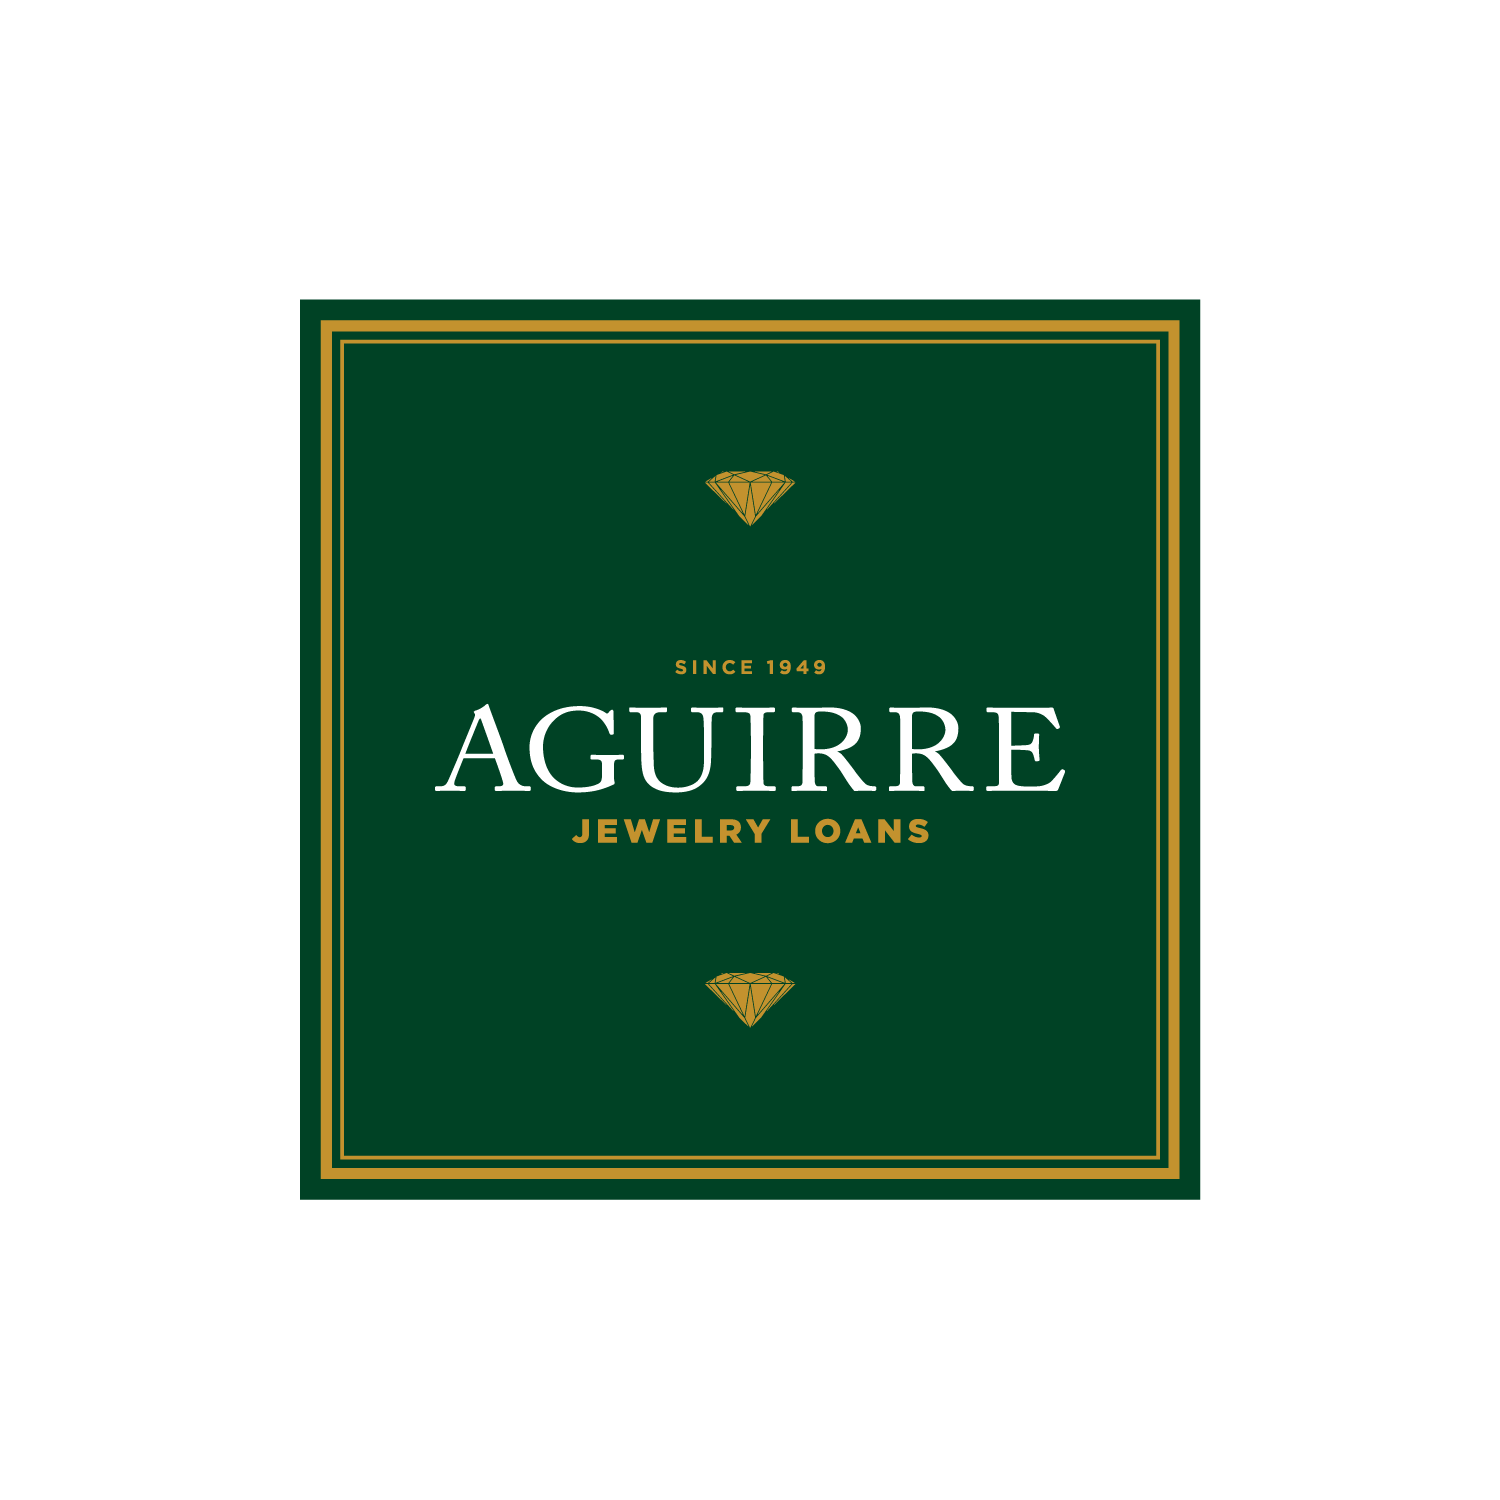 Aguirre Jewelry and Loans